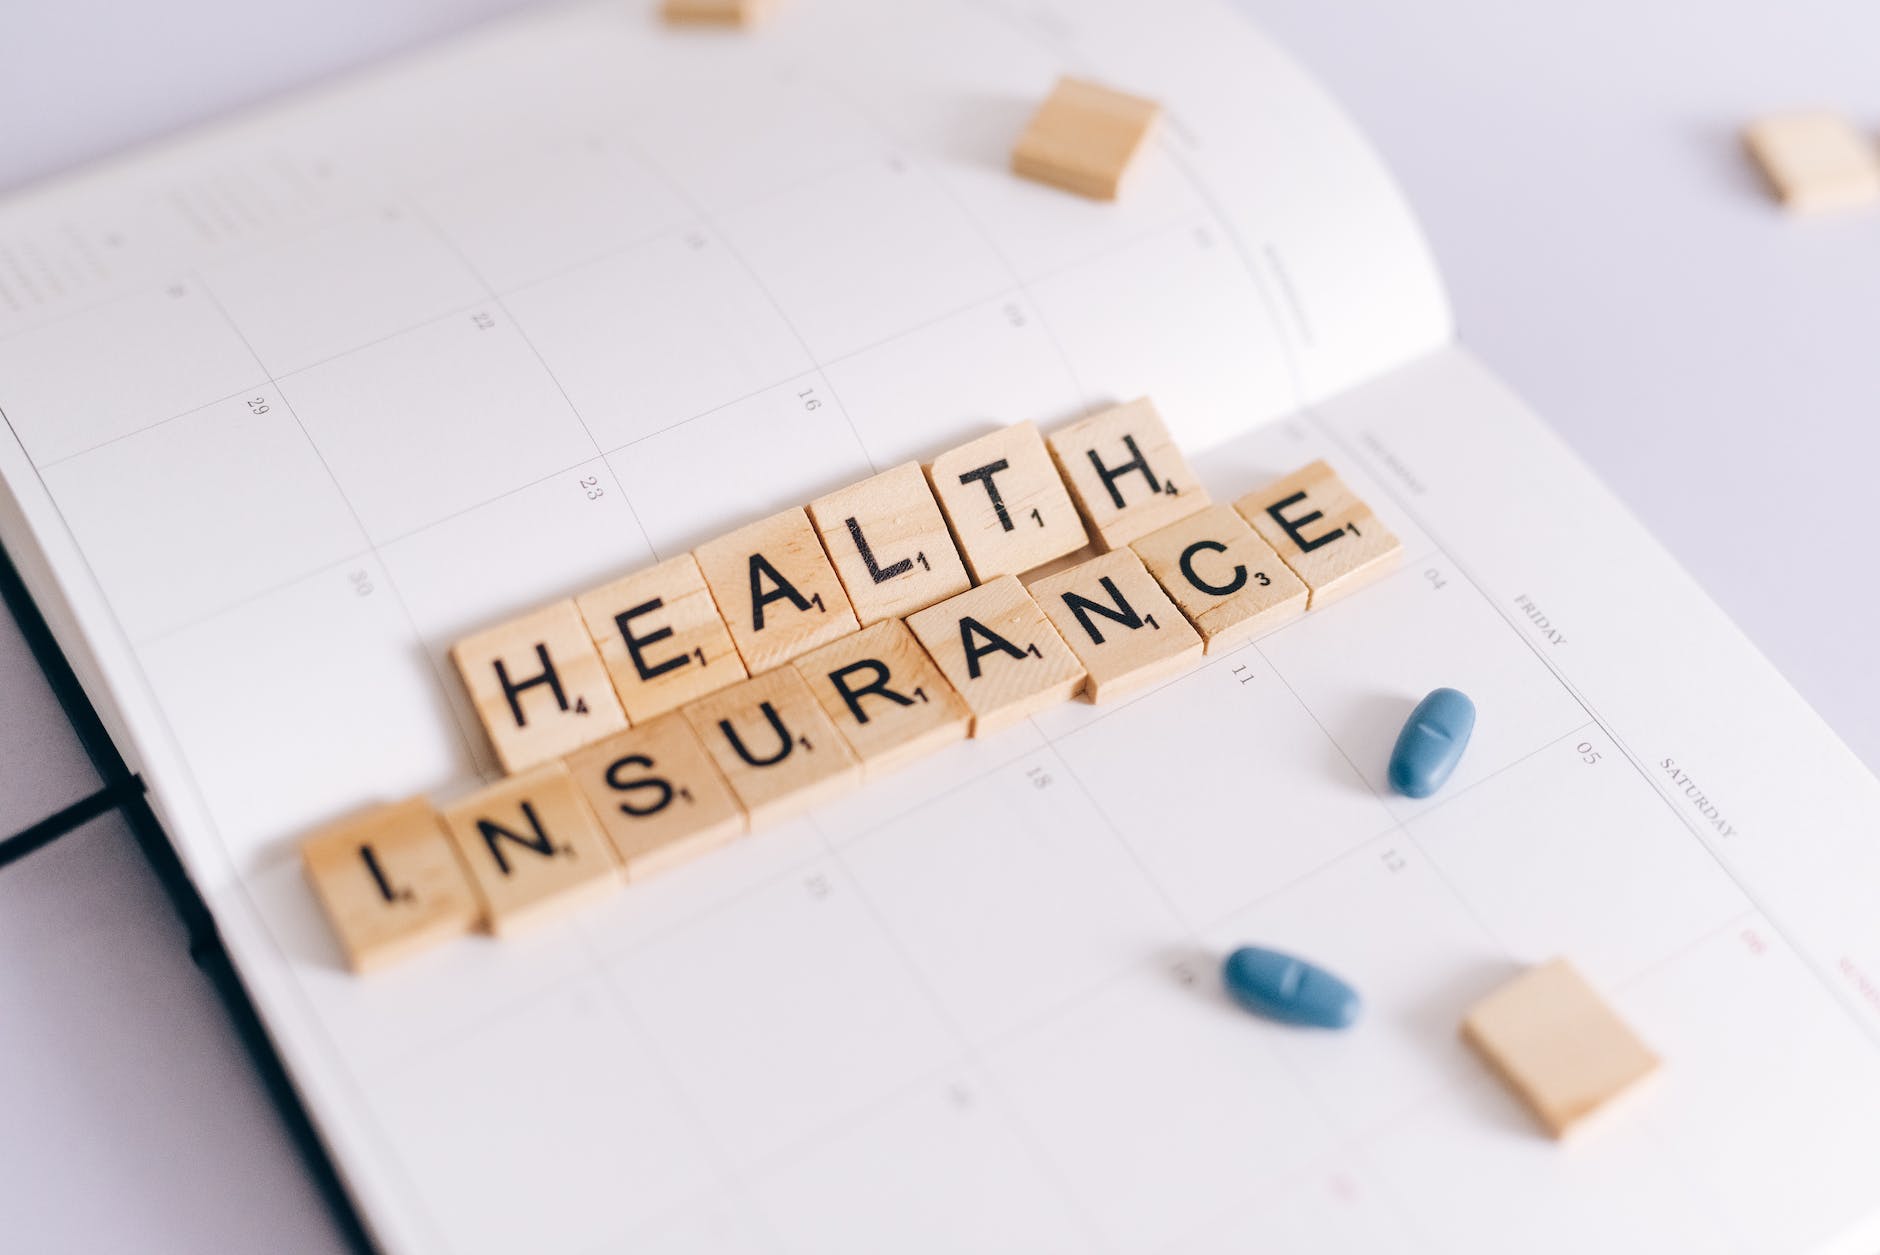 Health insurance after layoff